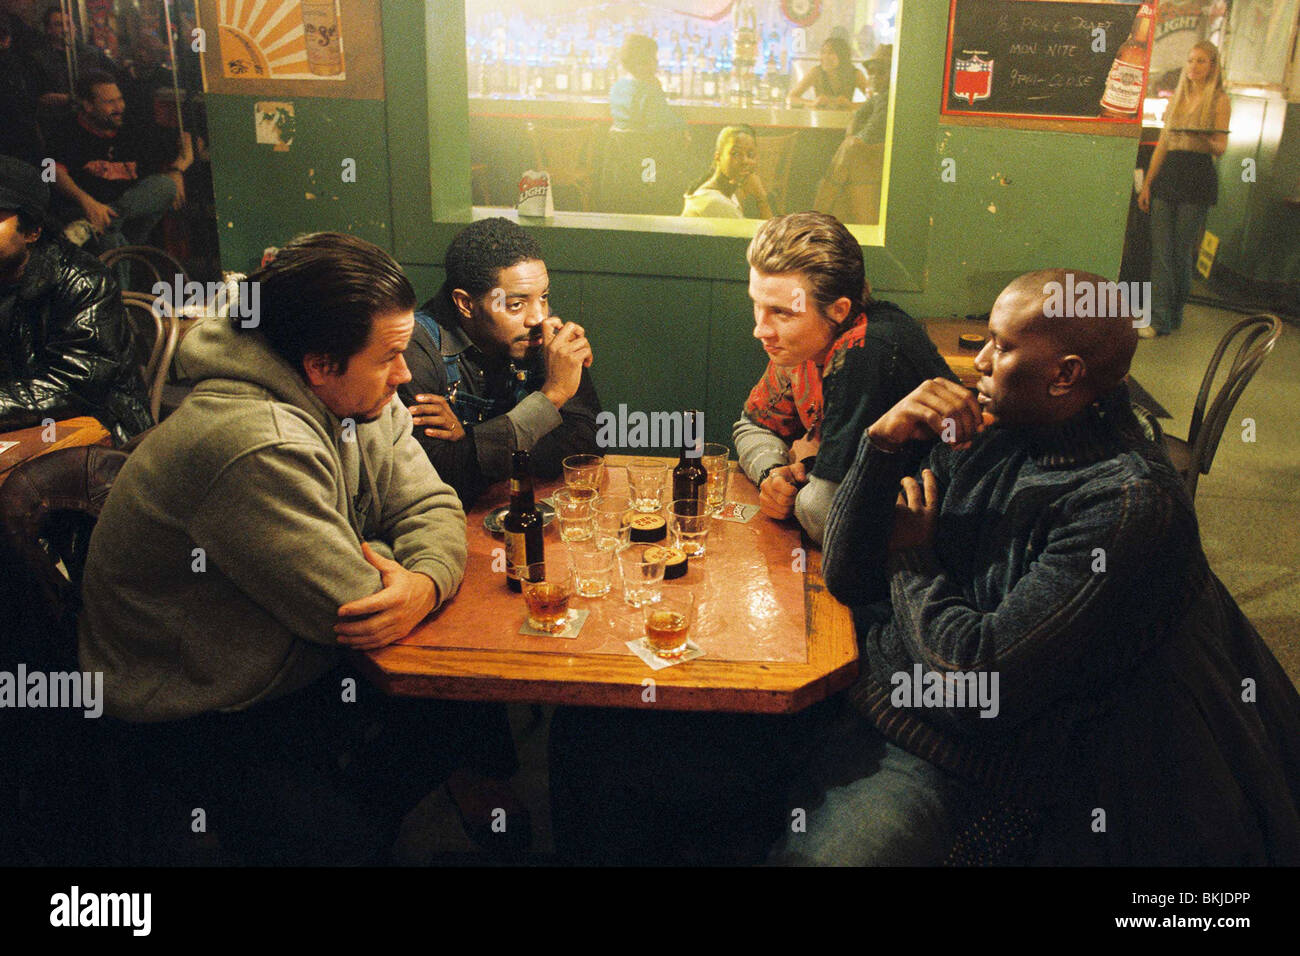 FOUR BROTHERS (2005) MARK WAHLBERG, ANDRE BENJAMIN, GARRETT HEDLUND, TYRESE GIBSON FBRO 002-014 Stock Photo